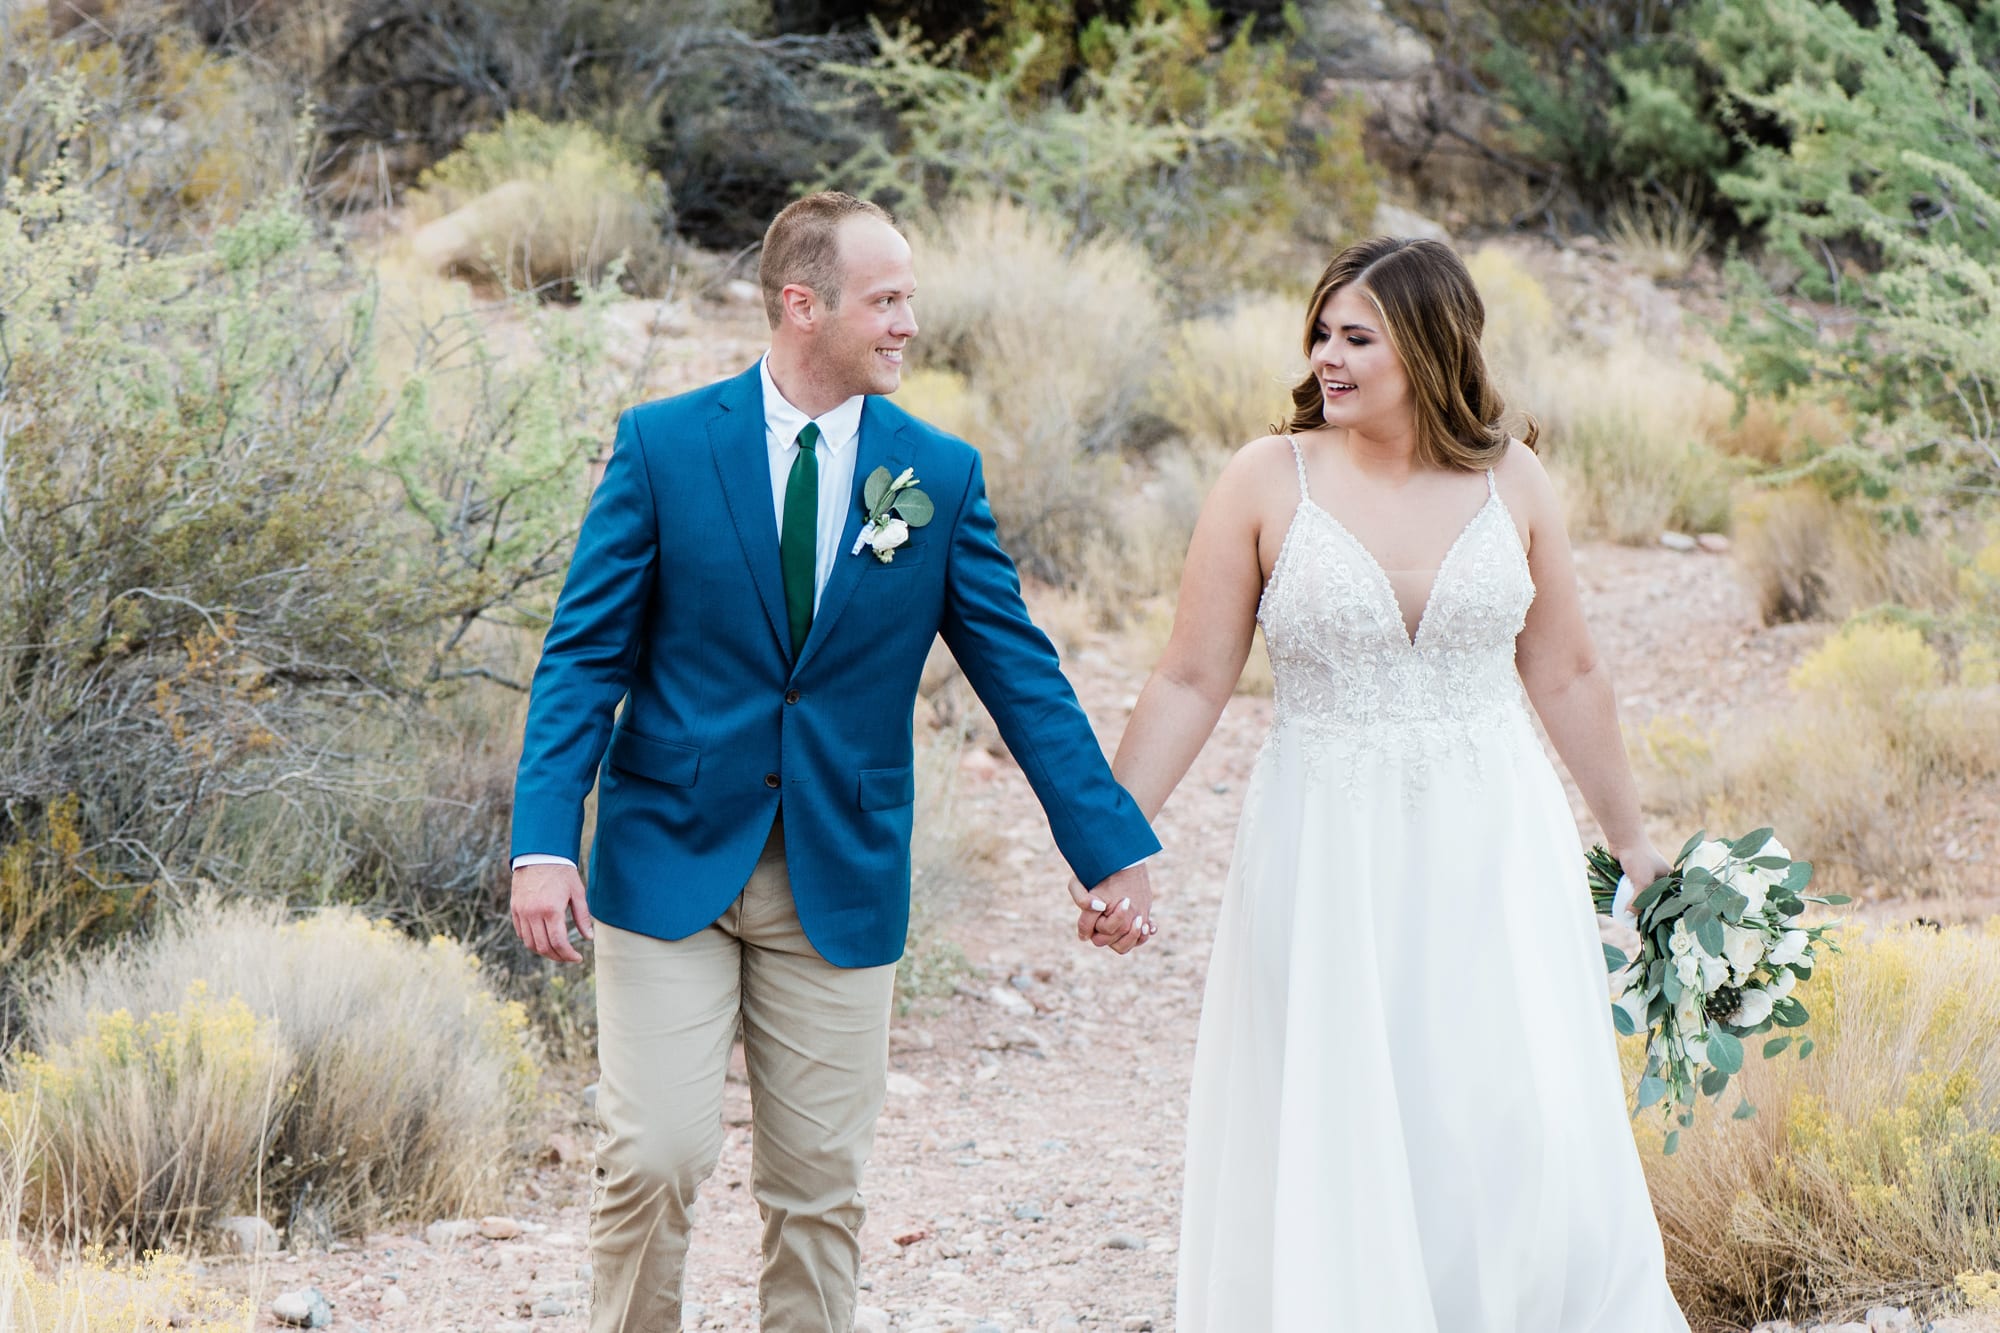 Charissa + Aaron: A Real Wedding in Red Spring